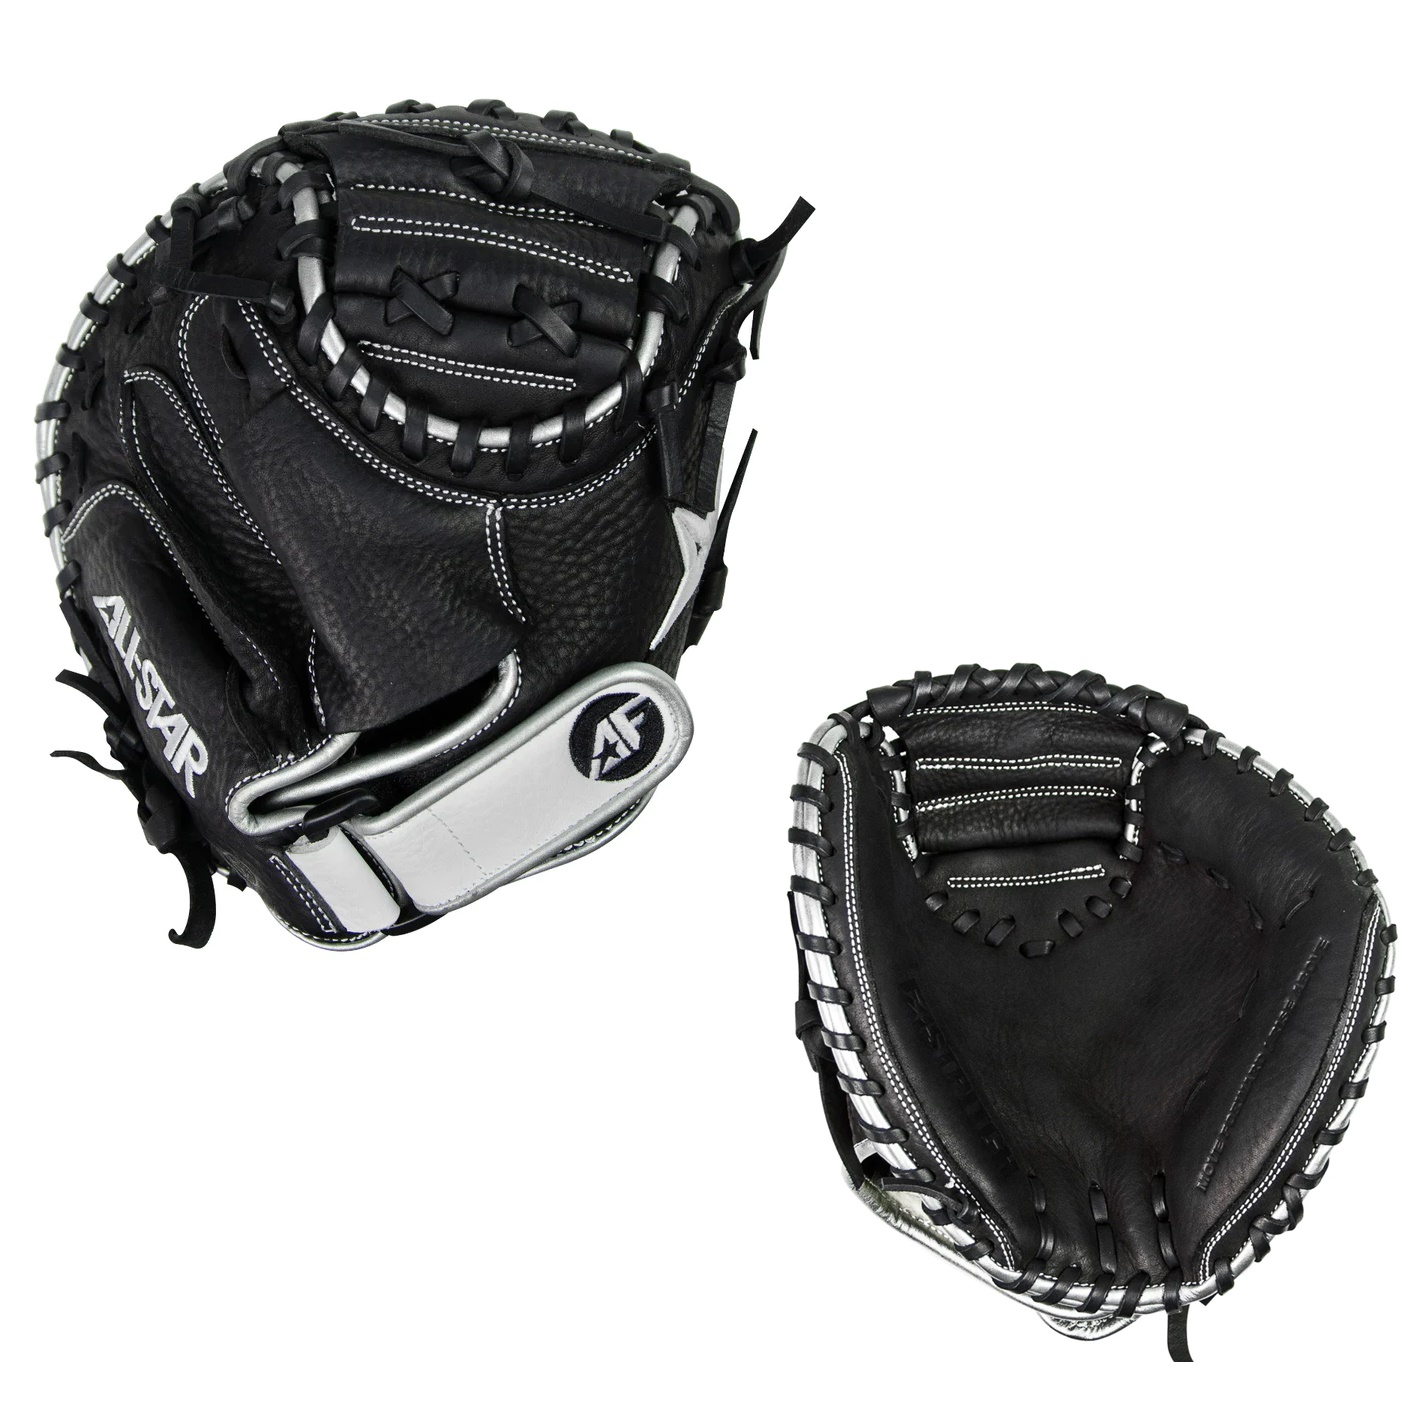 all-star-focus-framer-fastpitch-softball-catchers-trainer-right-hand-throw CMW150TM-RightHandThrow   The All-Star Focus Framer Fastpitch Softball Trainer is a specialized piece